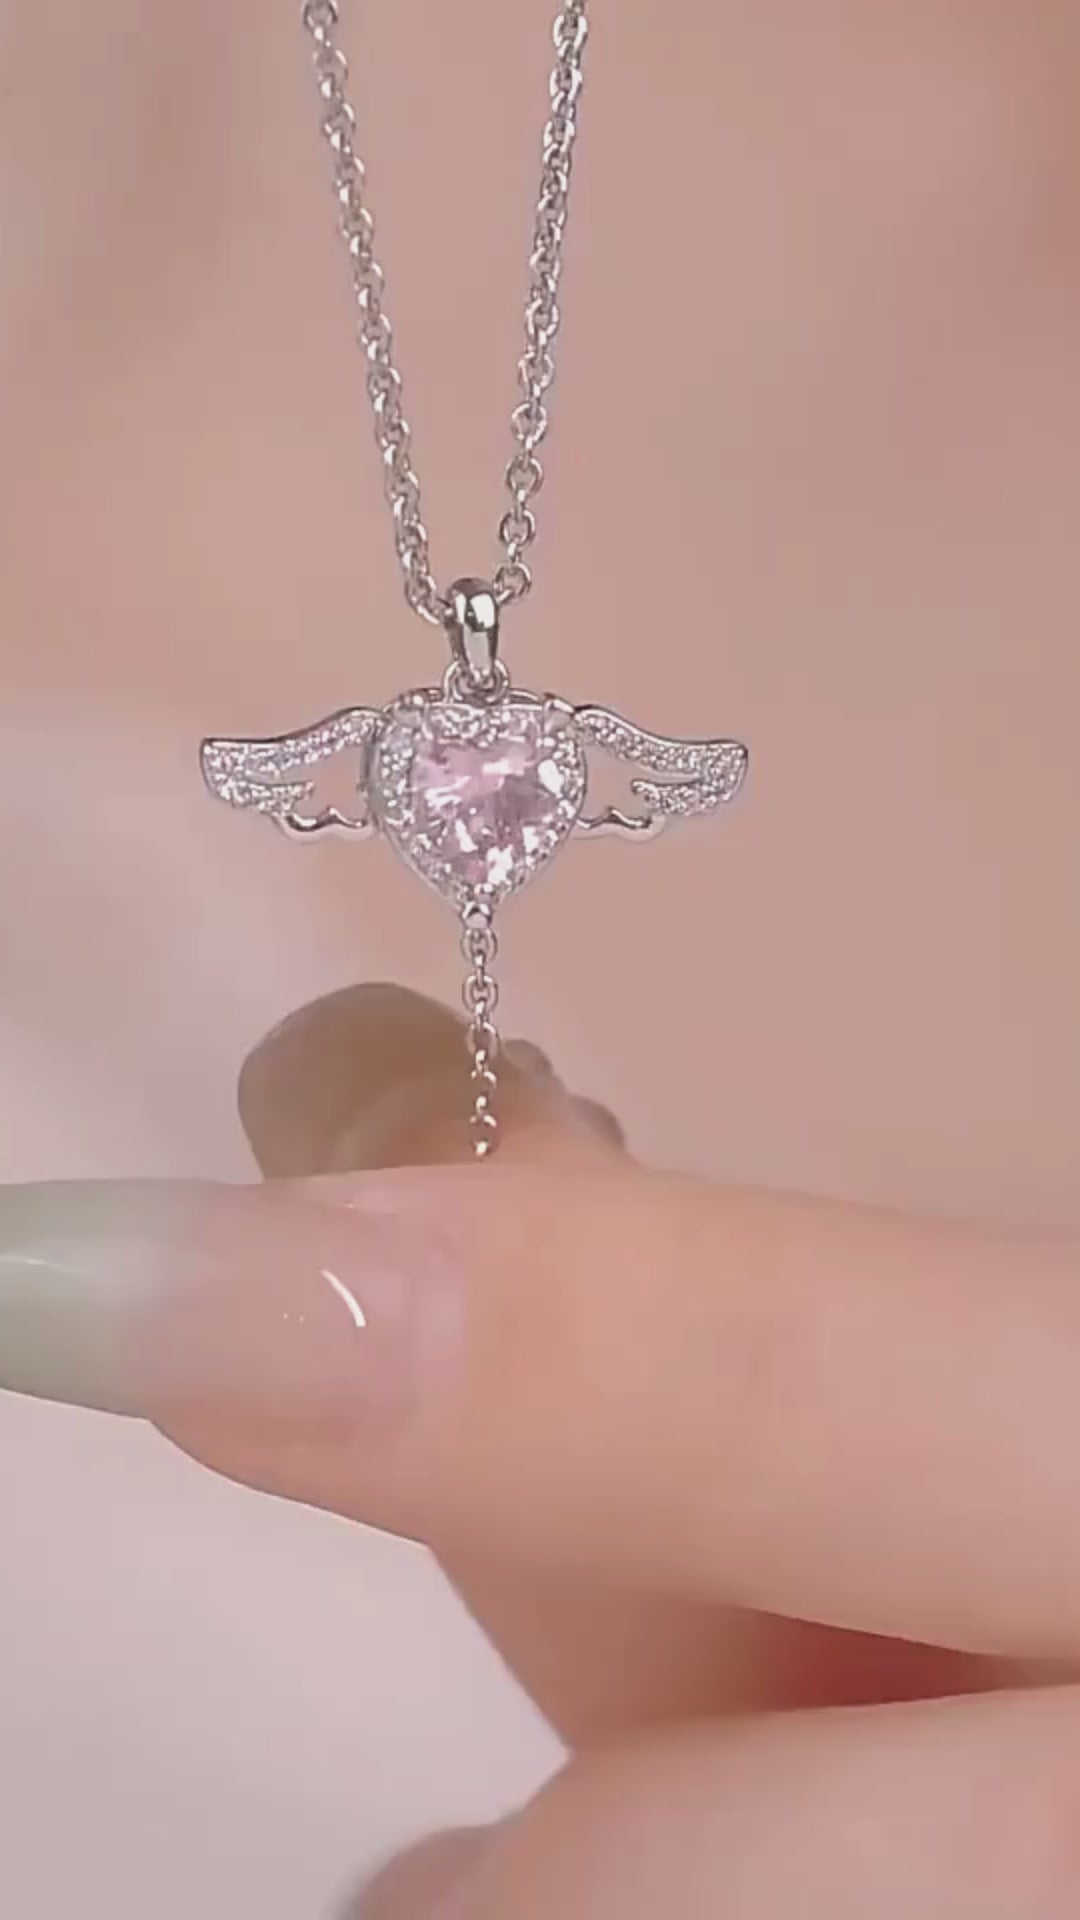 HEART WITH WINGS NECKLACE – my fantasy jewelry